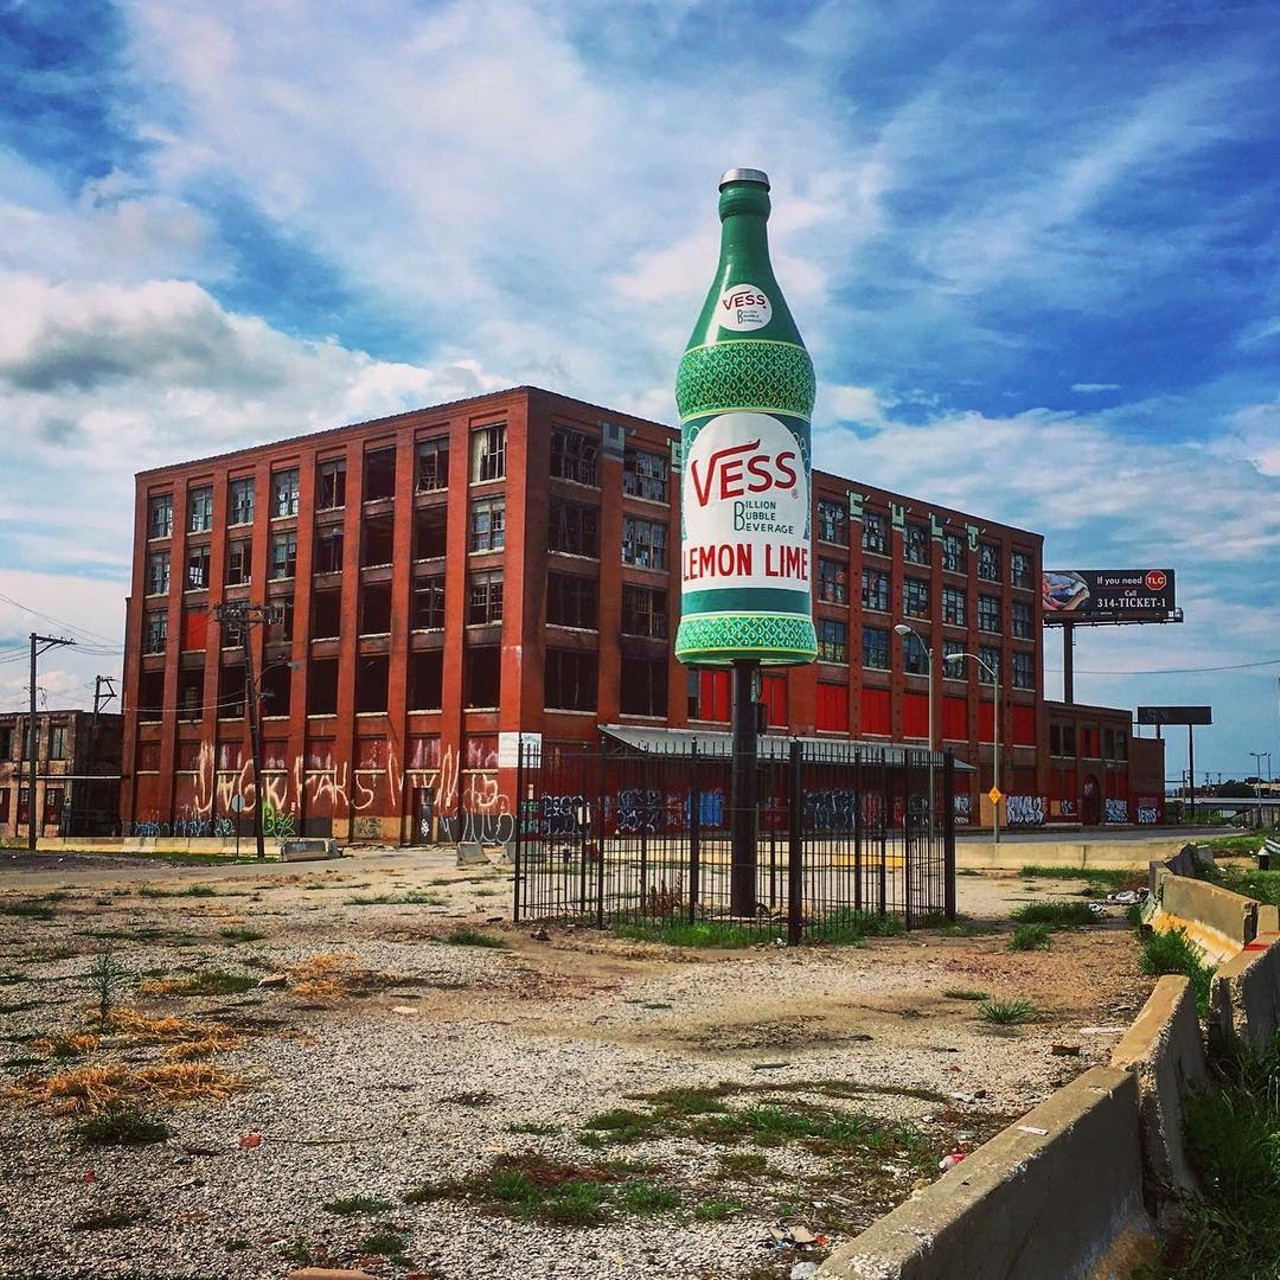 Giant Vess Soda Bottle
N. 6th St., St. Louis, MO
This bottle has traveled around the St. Louis area for years, finally finding a permanent home right near Interstate 70. You ask why. We ask why not?
Photo courtesy of marykatelasiter / Instagram